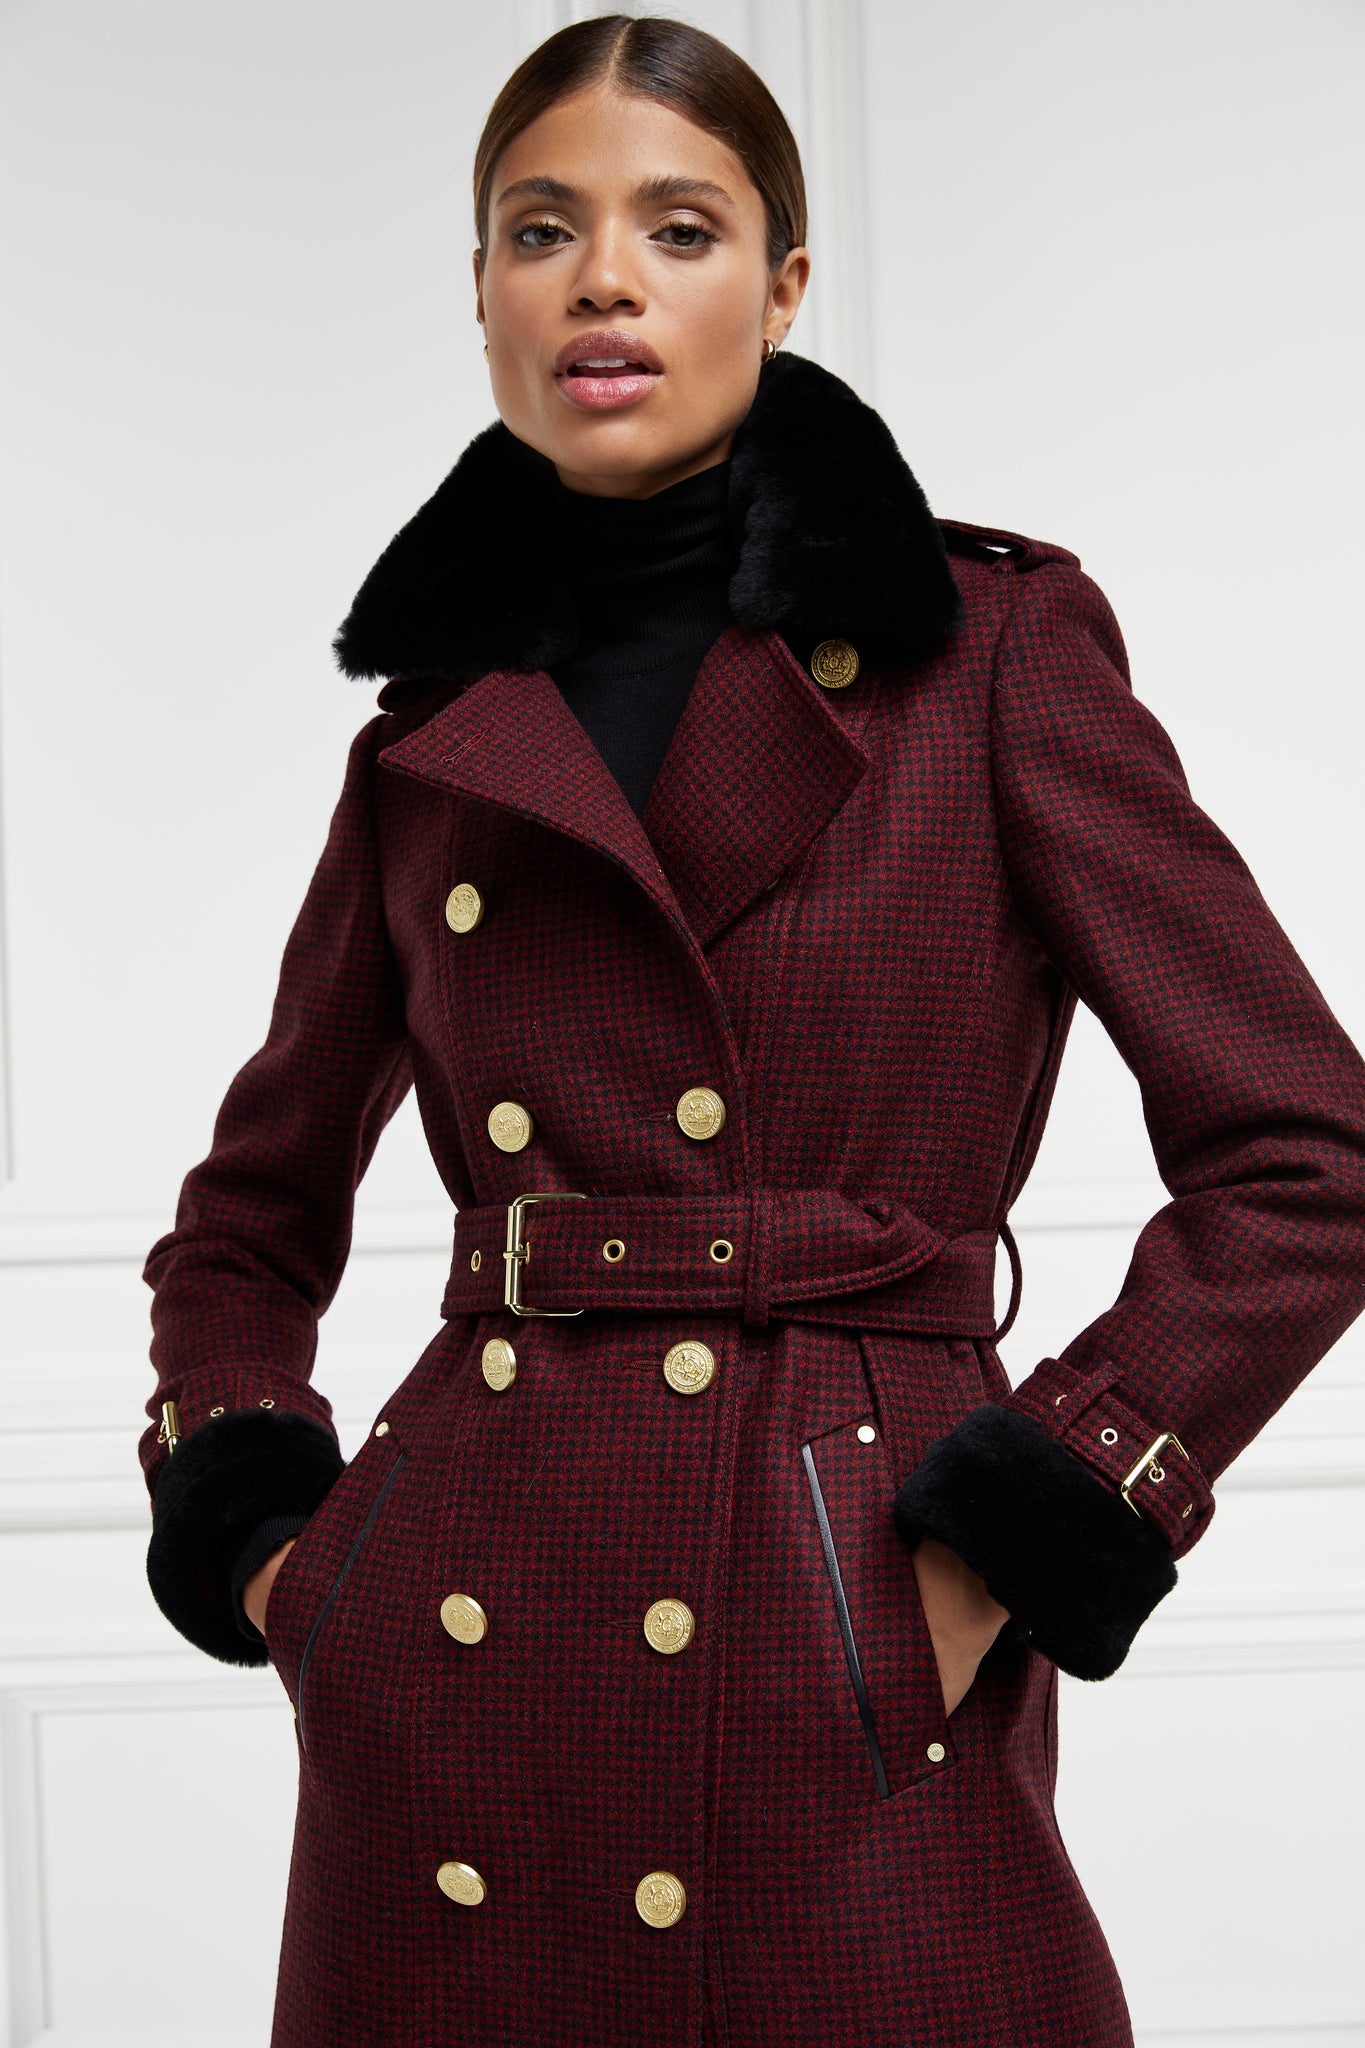 womens black and maroon houndstooth double breasted full length trench coat with black faux fur collar and cuffs